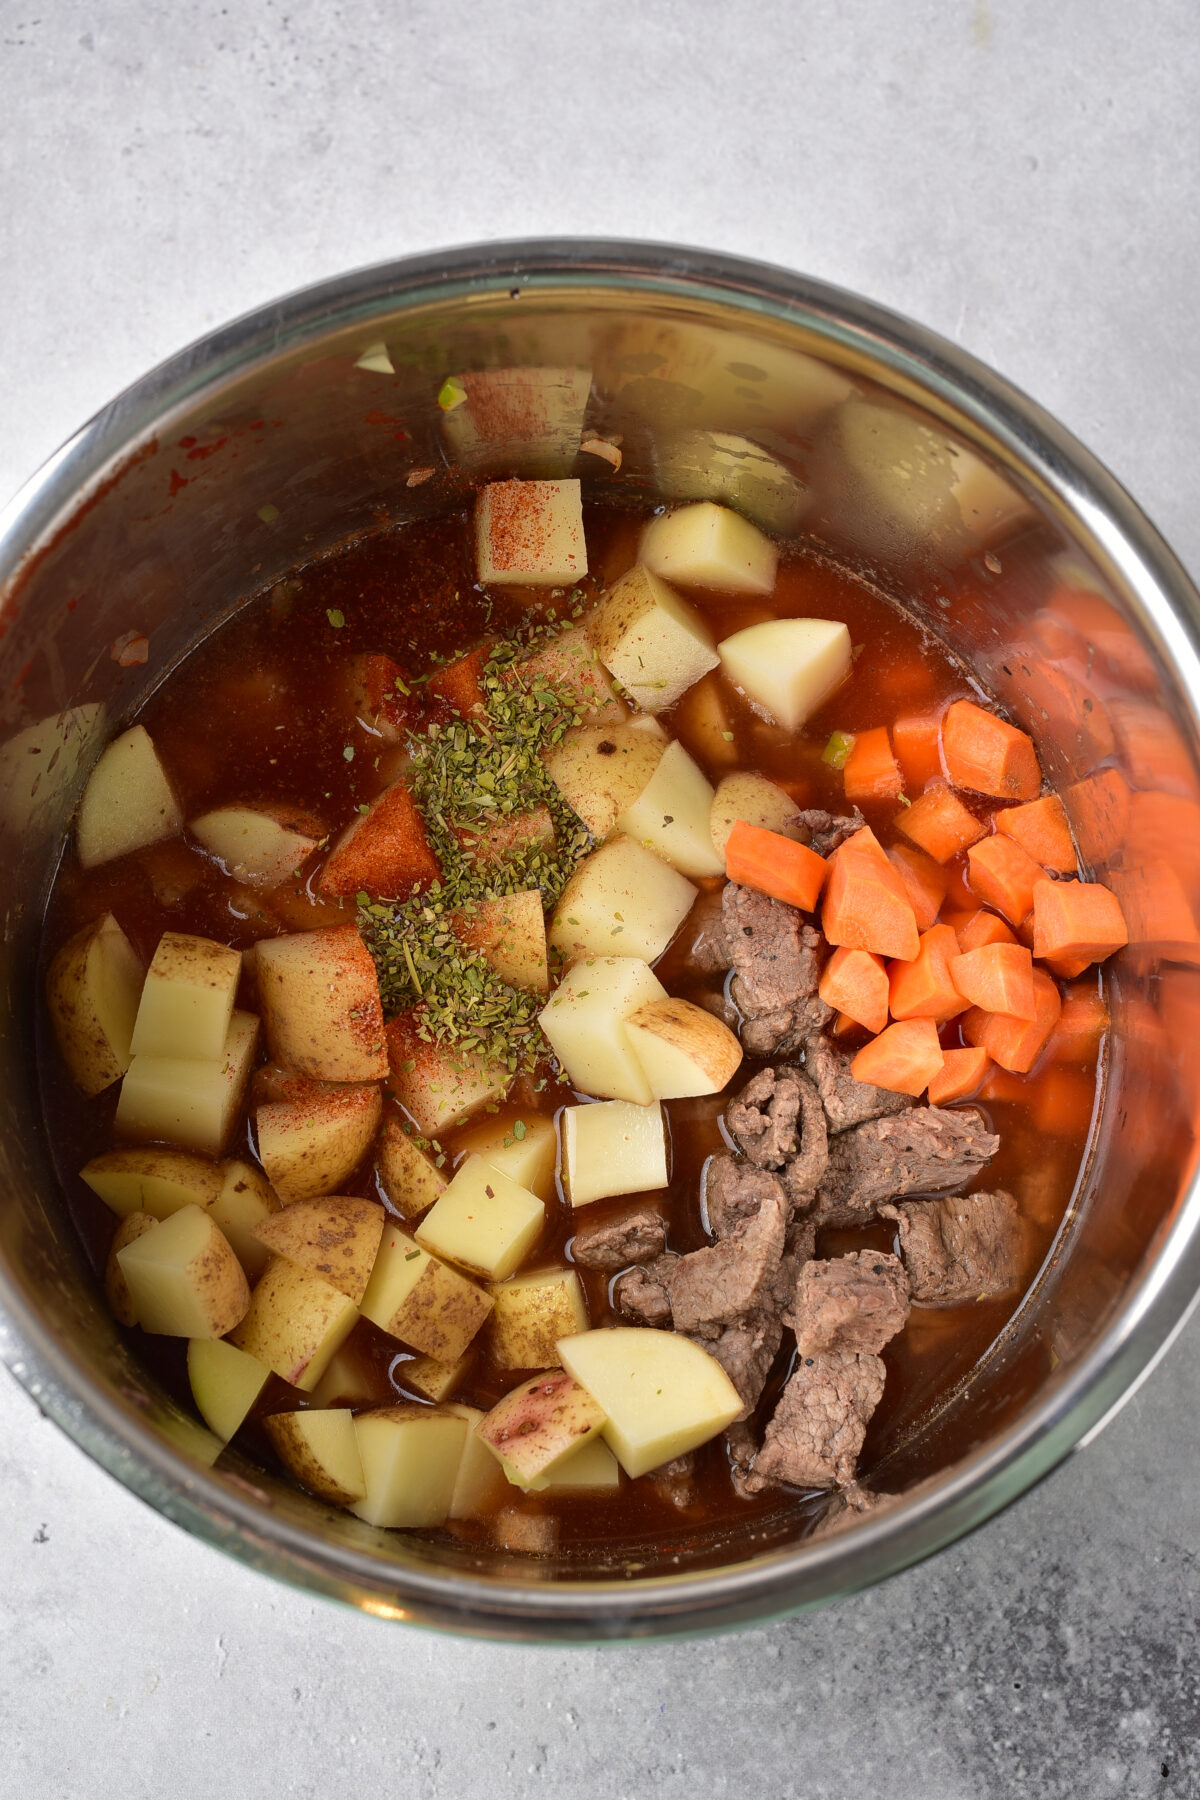 Potatoes, carrots, beef, and seasonings added to the instant pot.